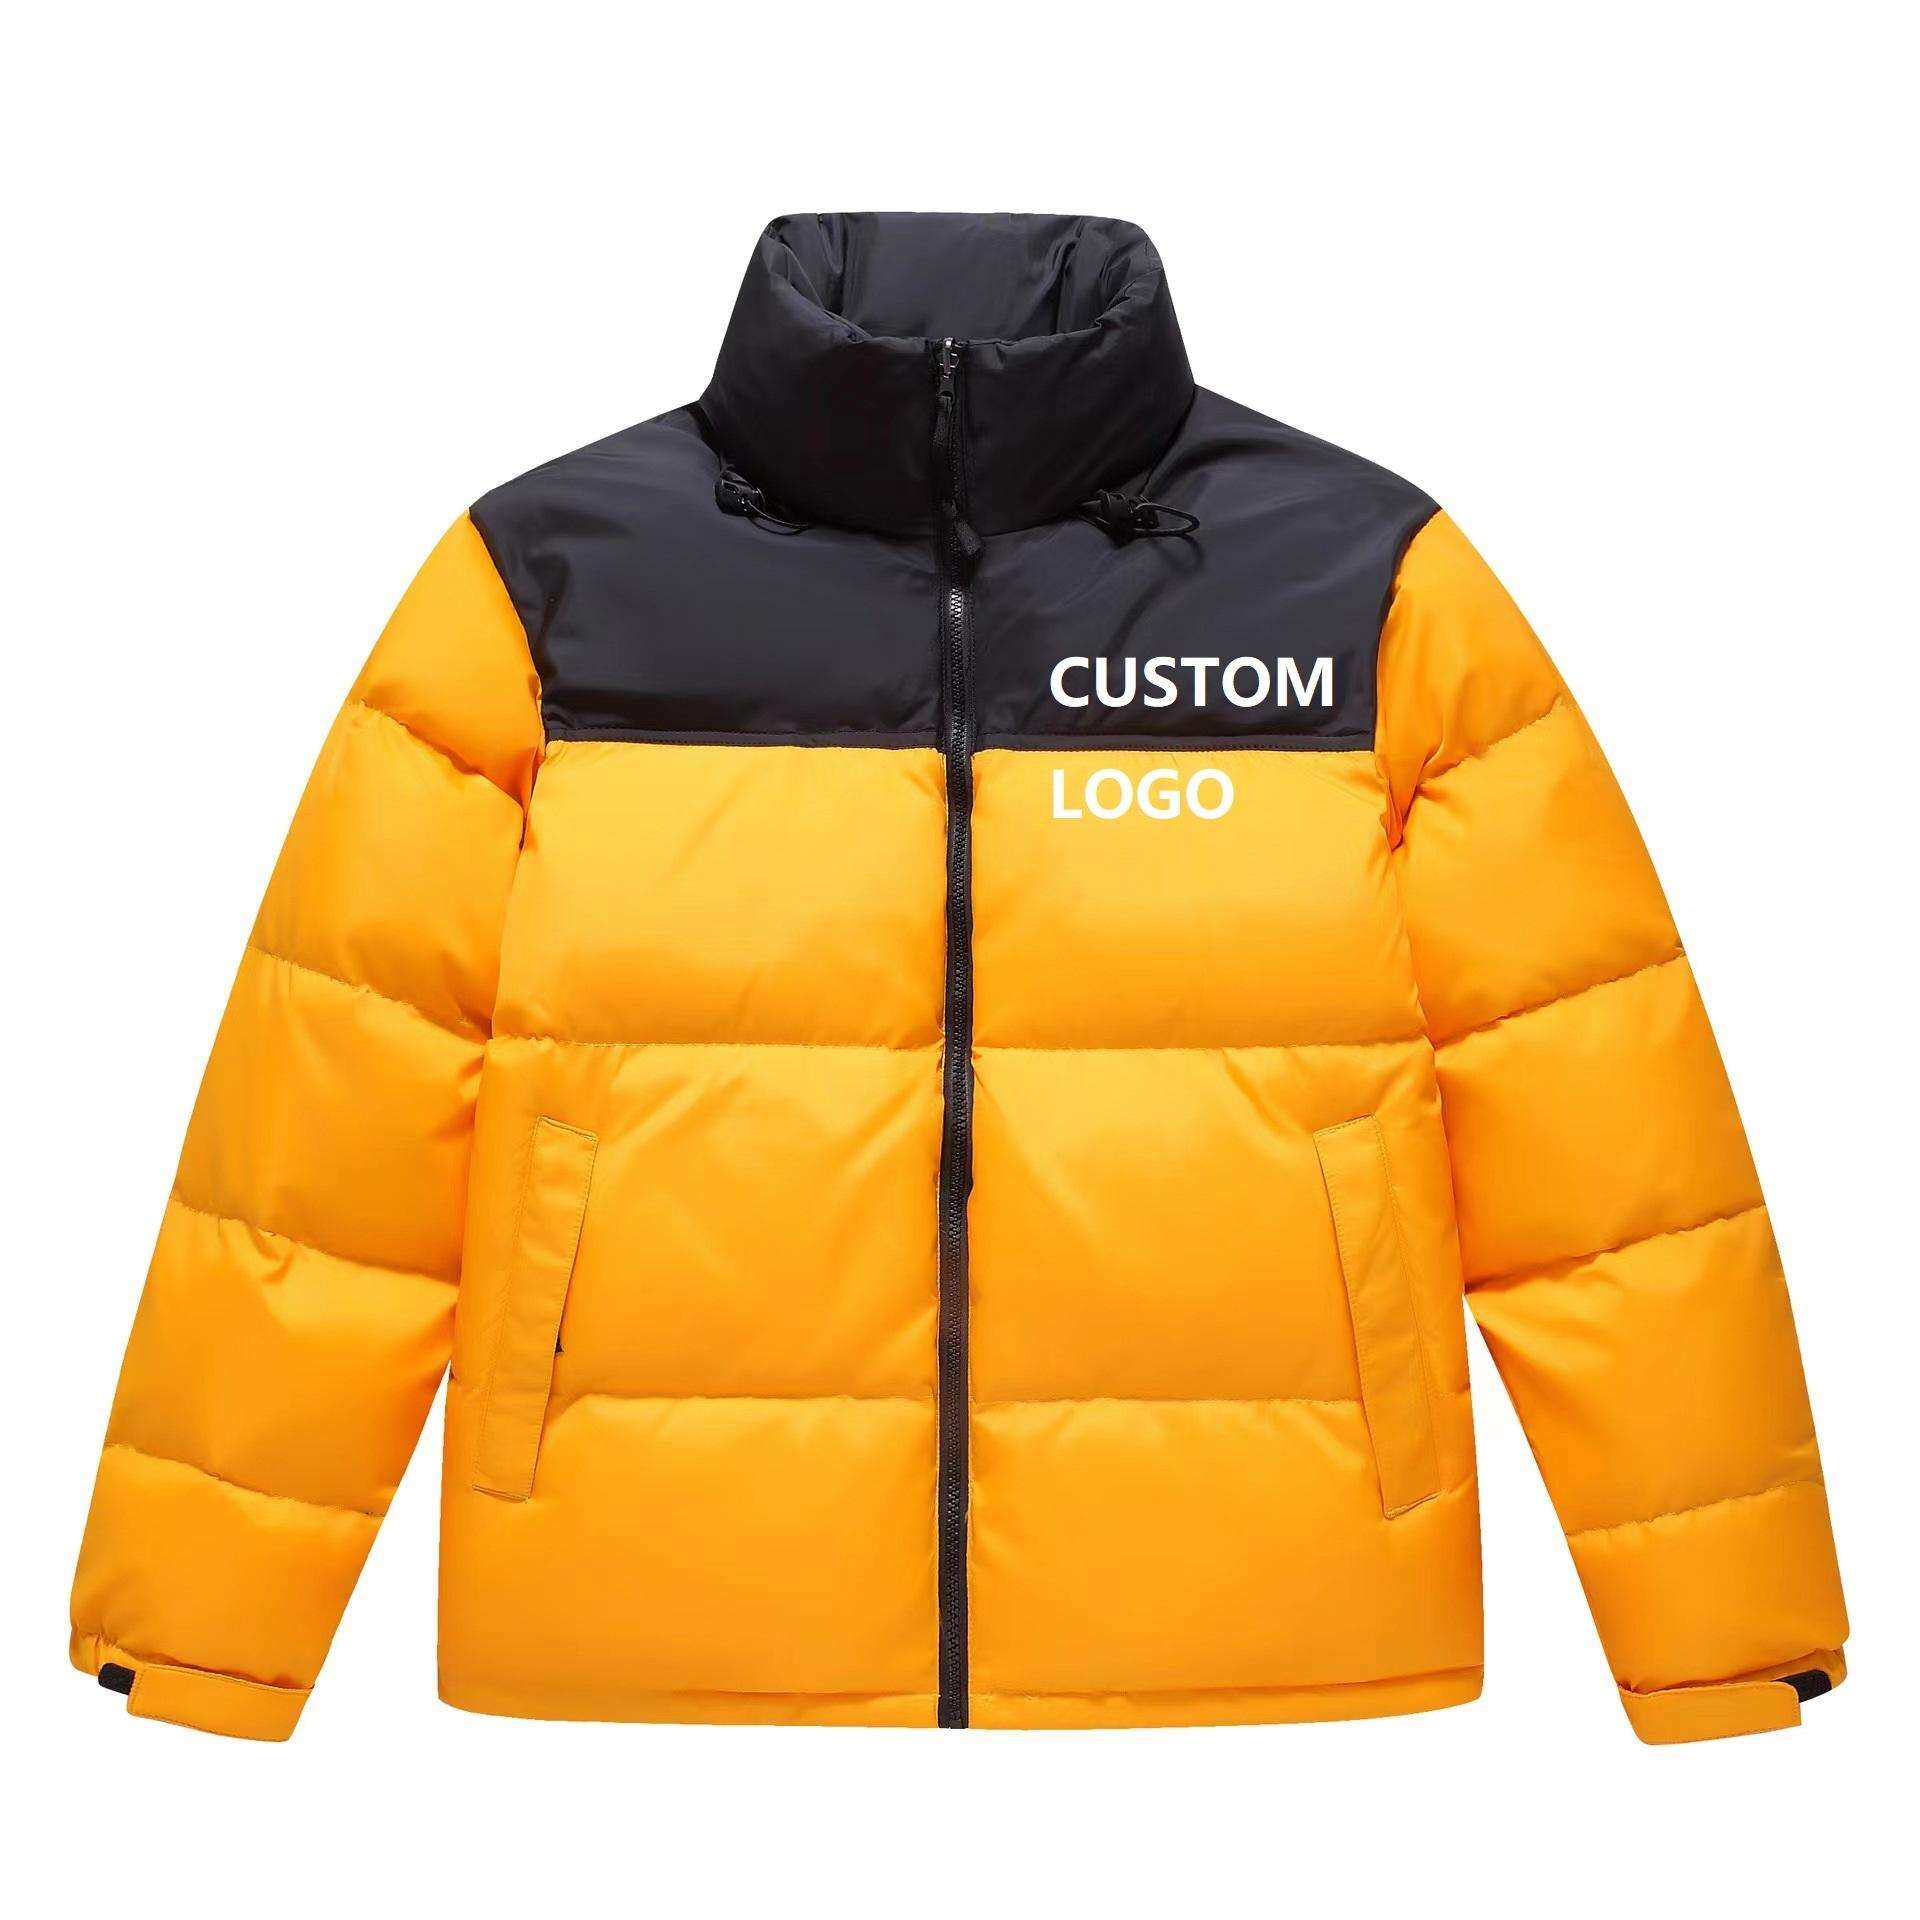 Jacket, Puffer Jacket, 80% Duck Down Filling, Contrasting Colors, Drawstring Zipper